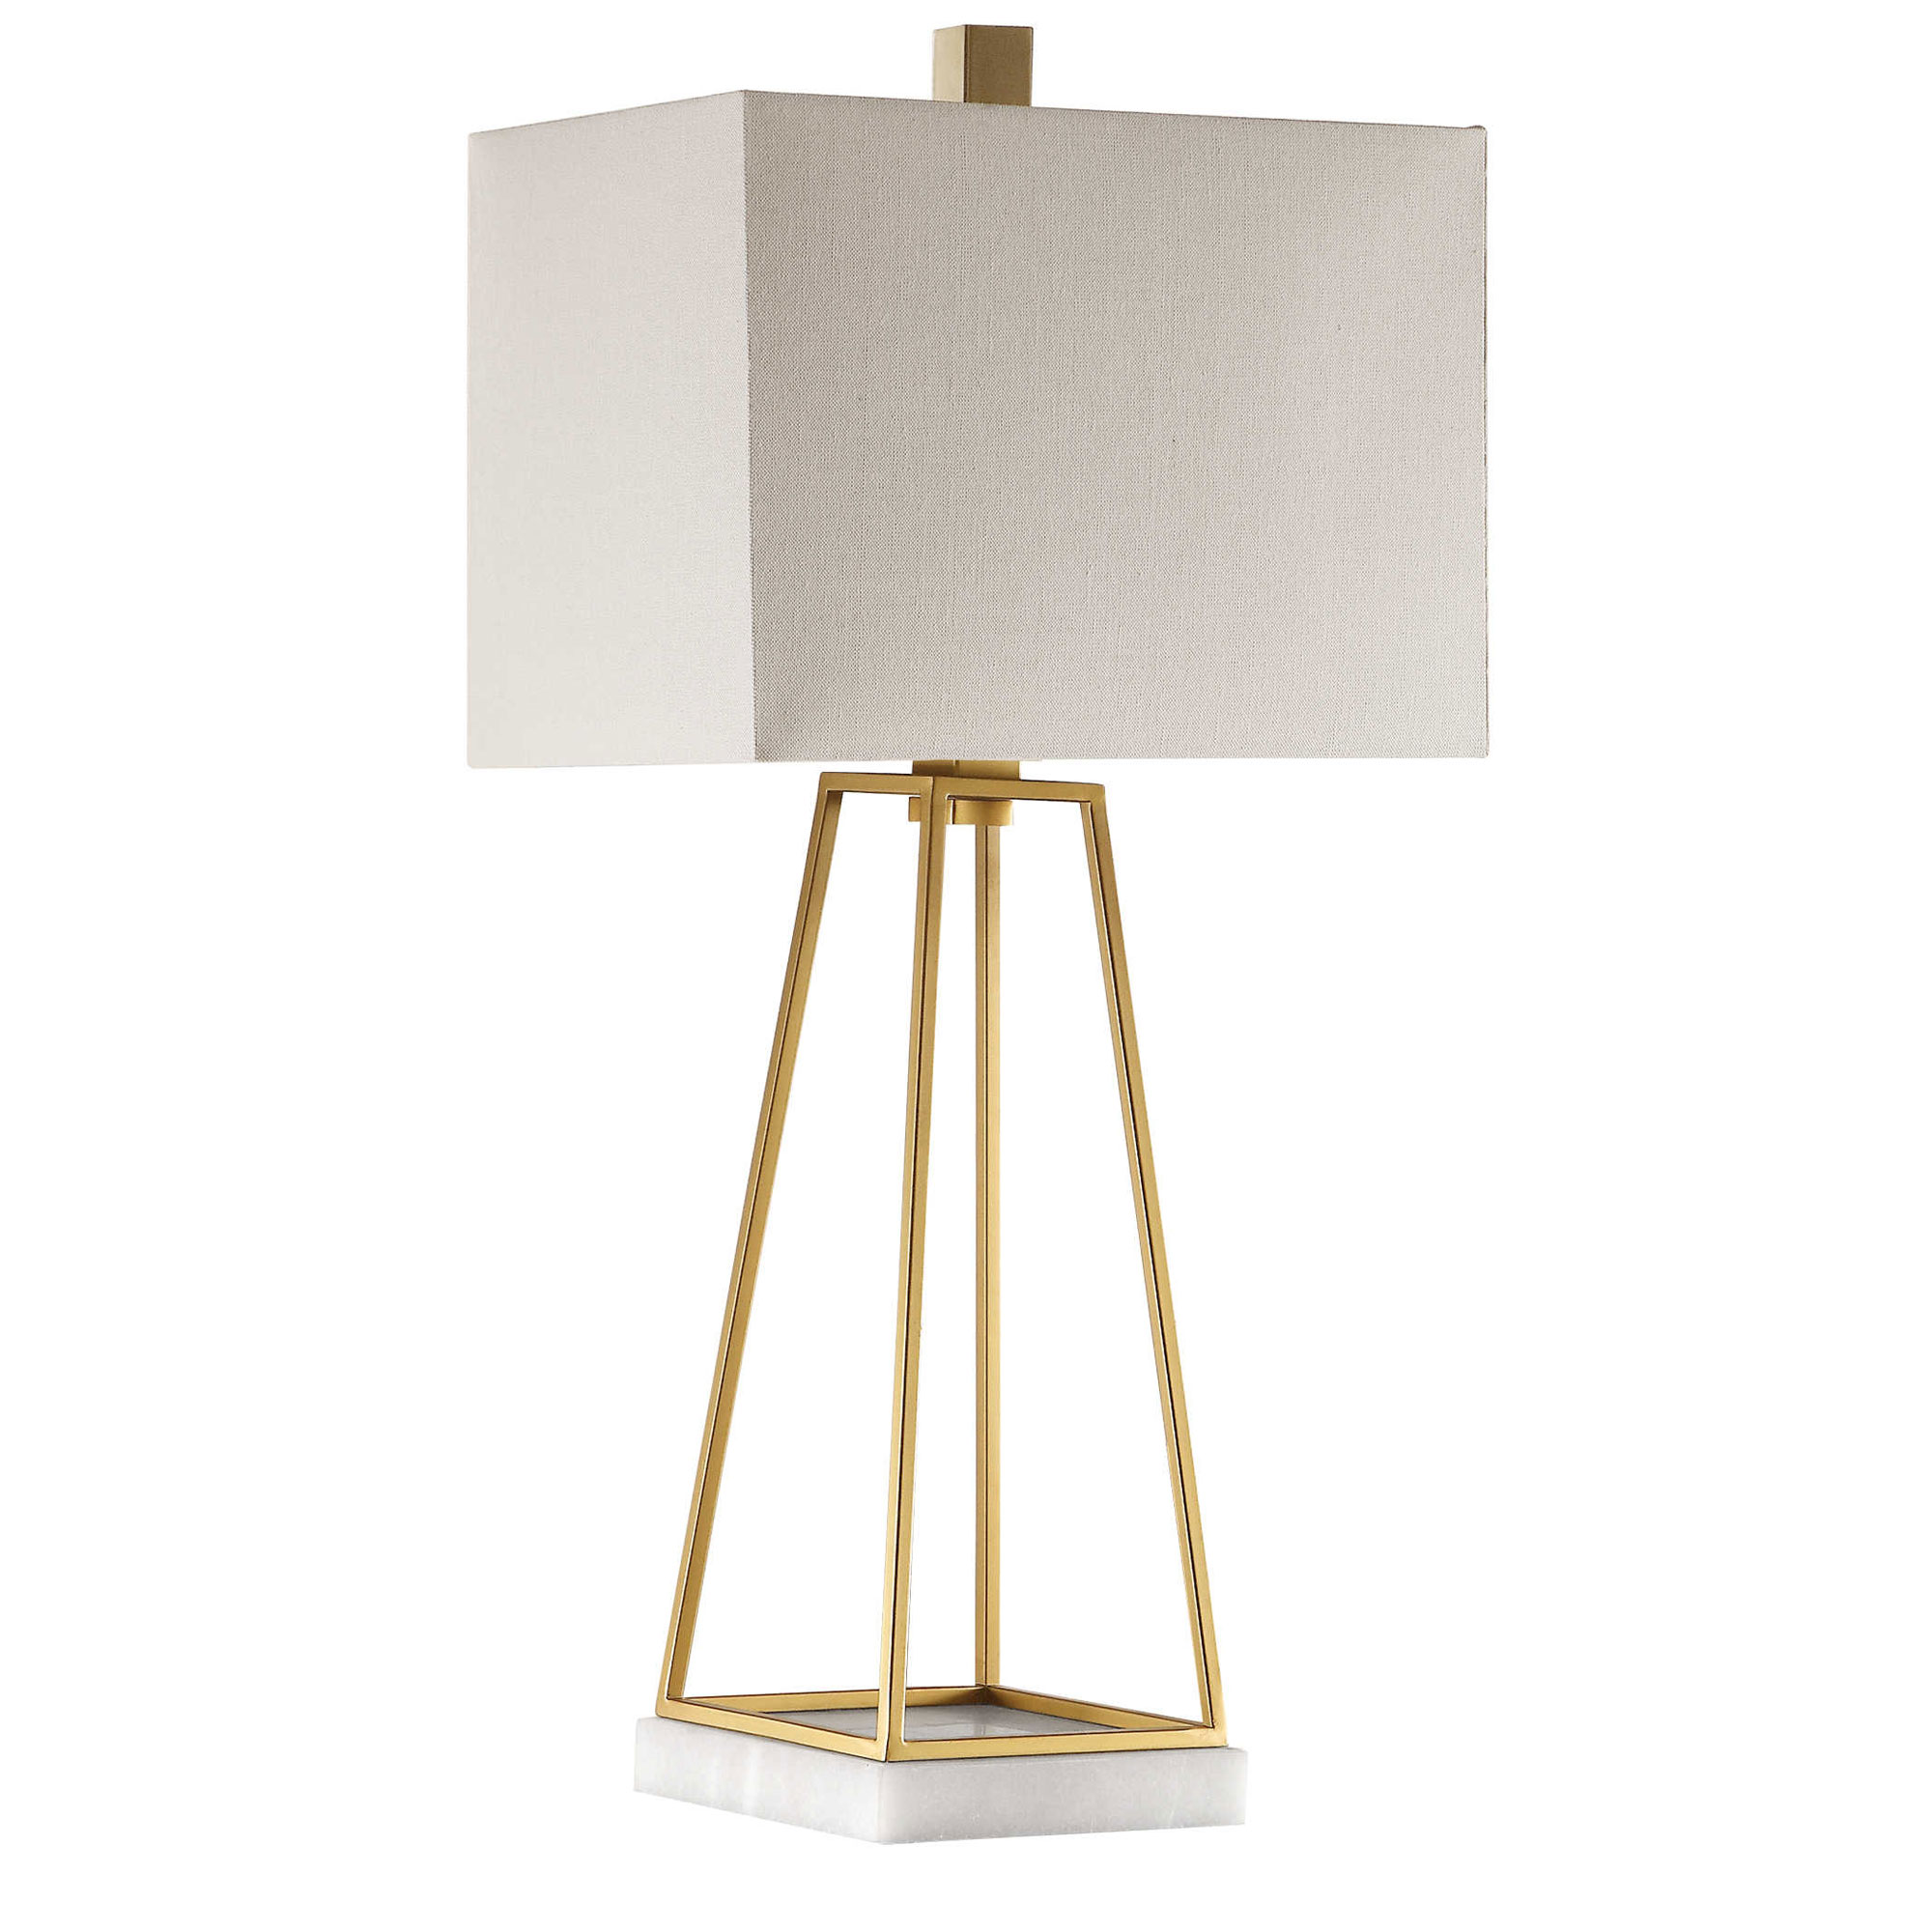 Uttermost Mackean Plated Metallic Gold Table Lamp 